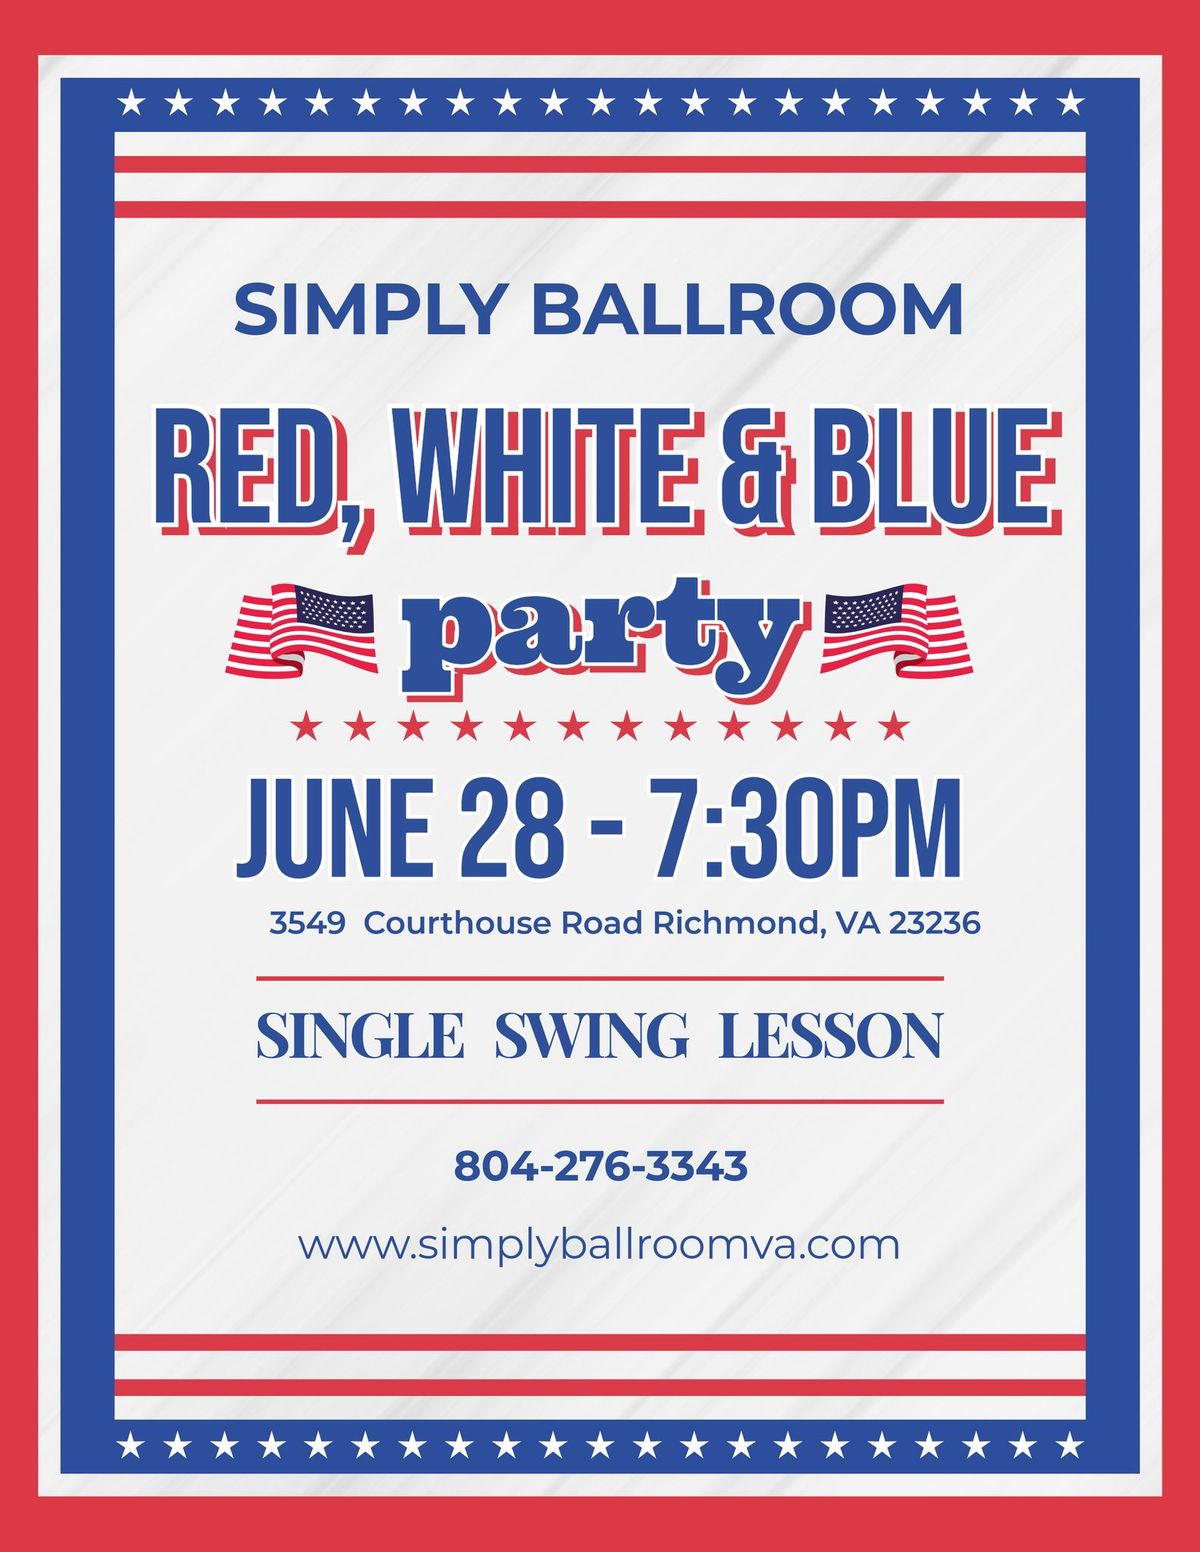 Red, White & Blue Party at Simply Ballroom